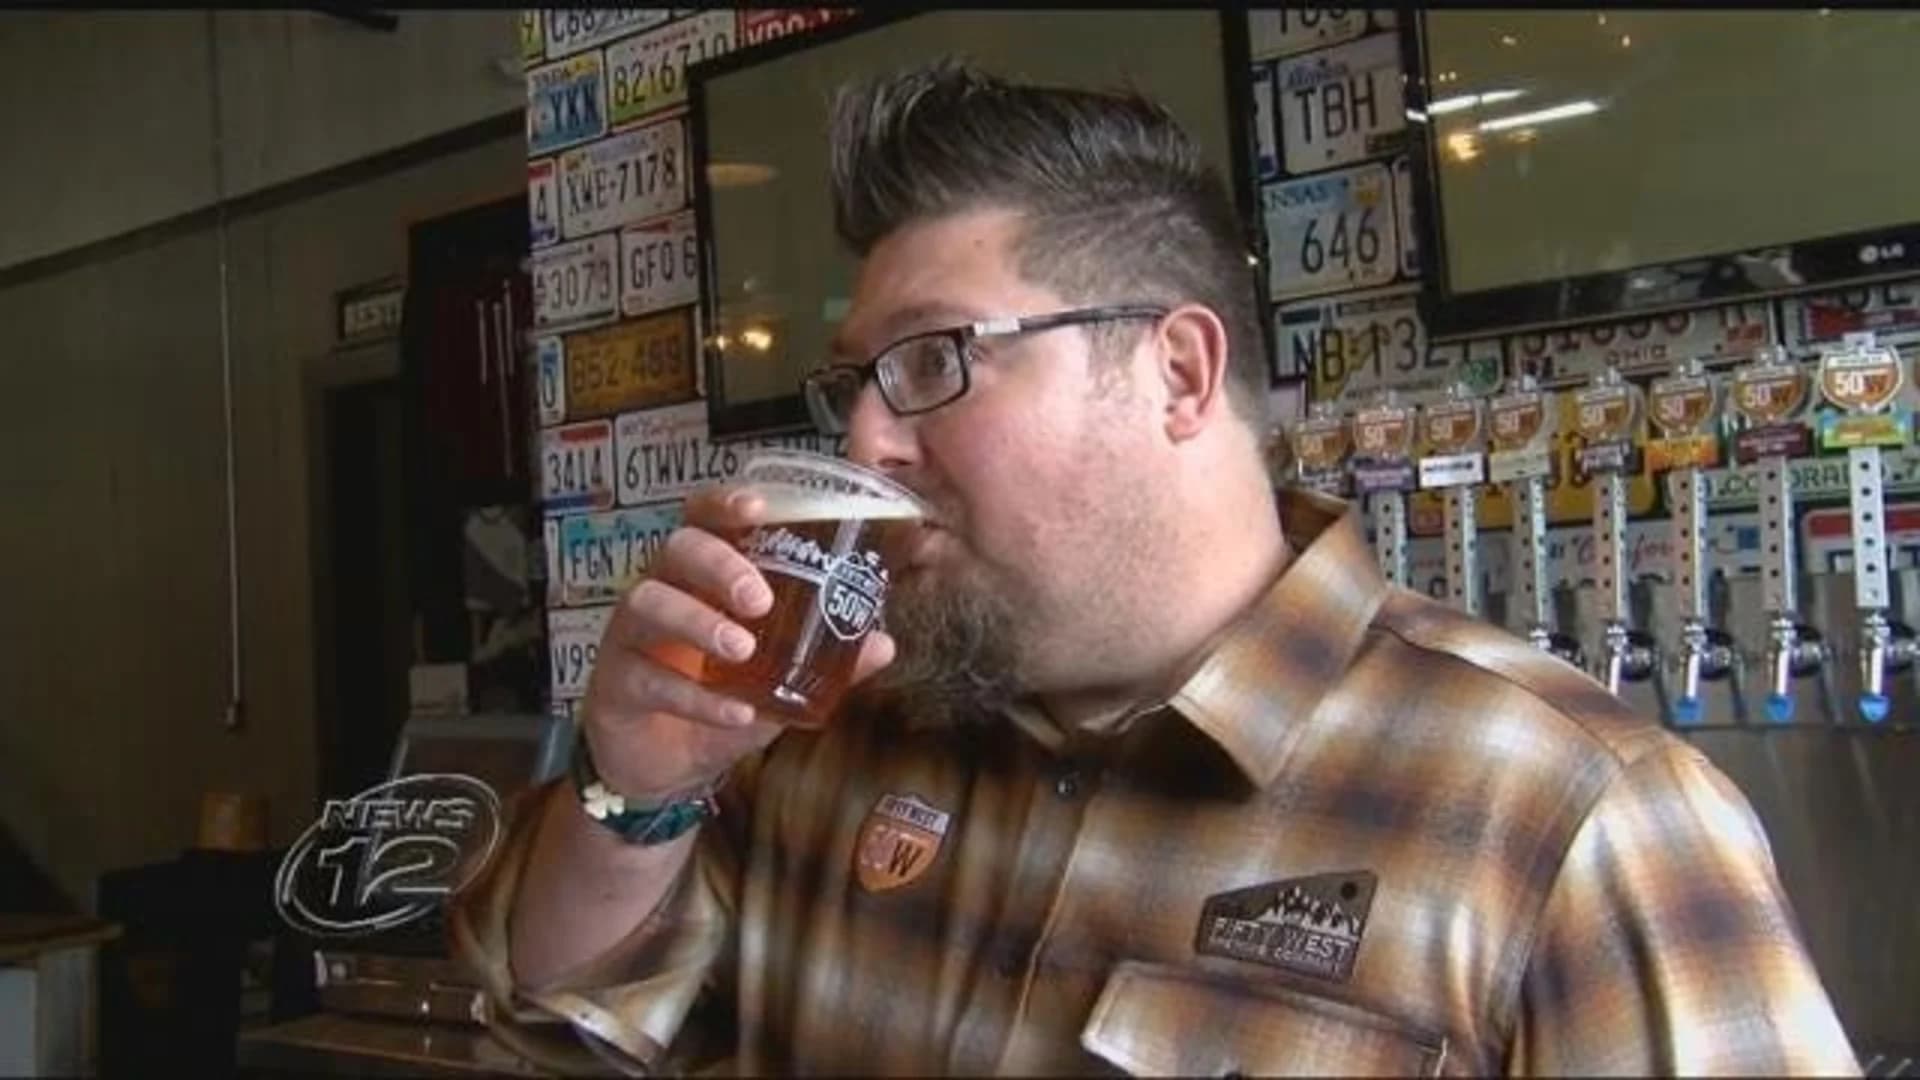 Man gives up food for beer during Lent